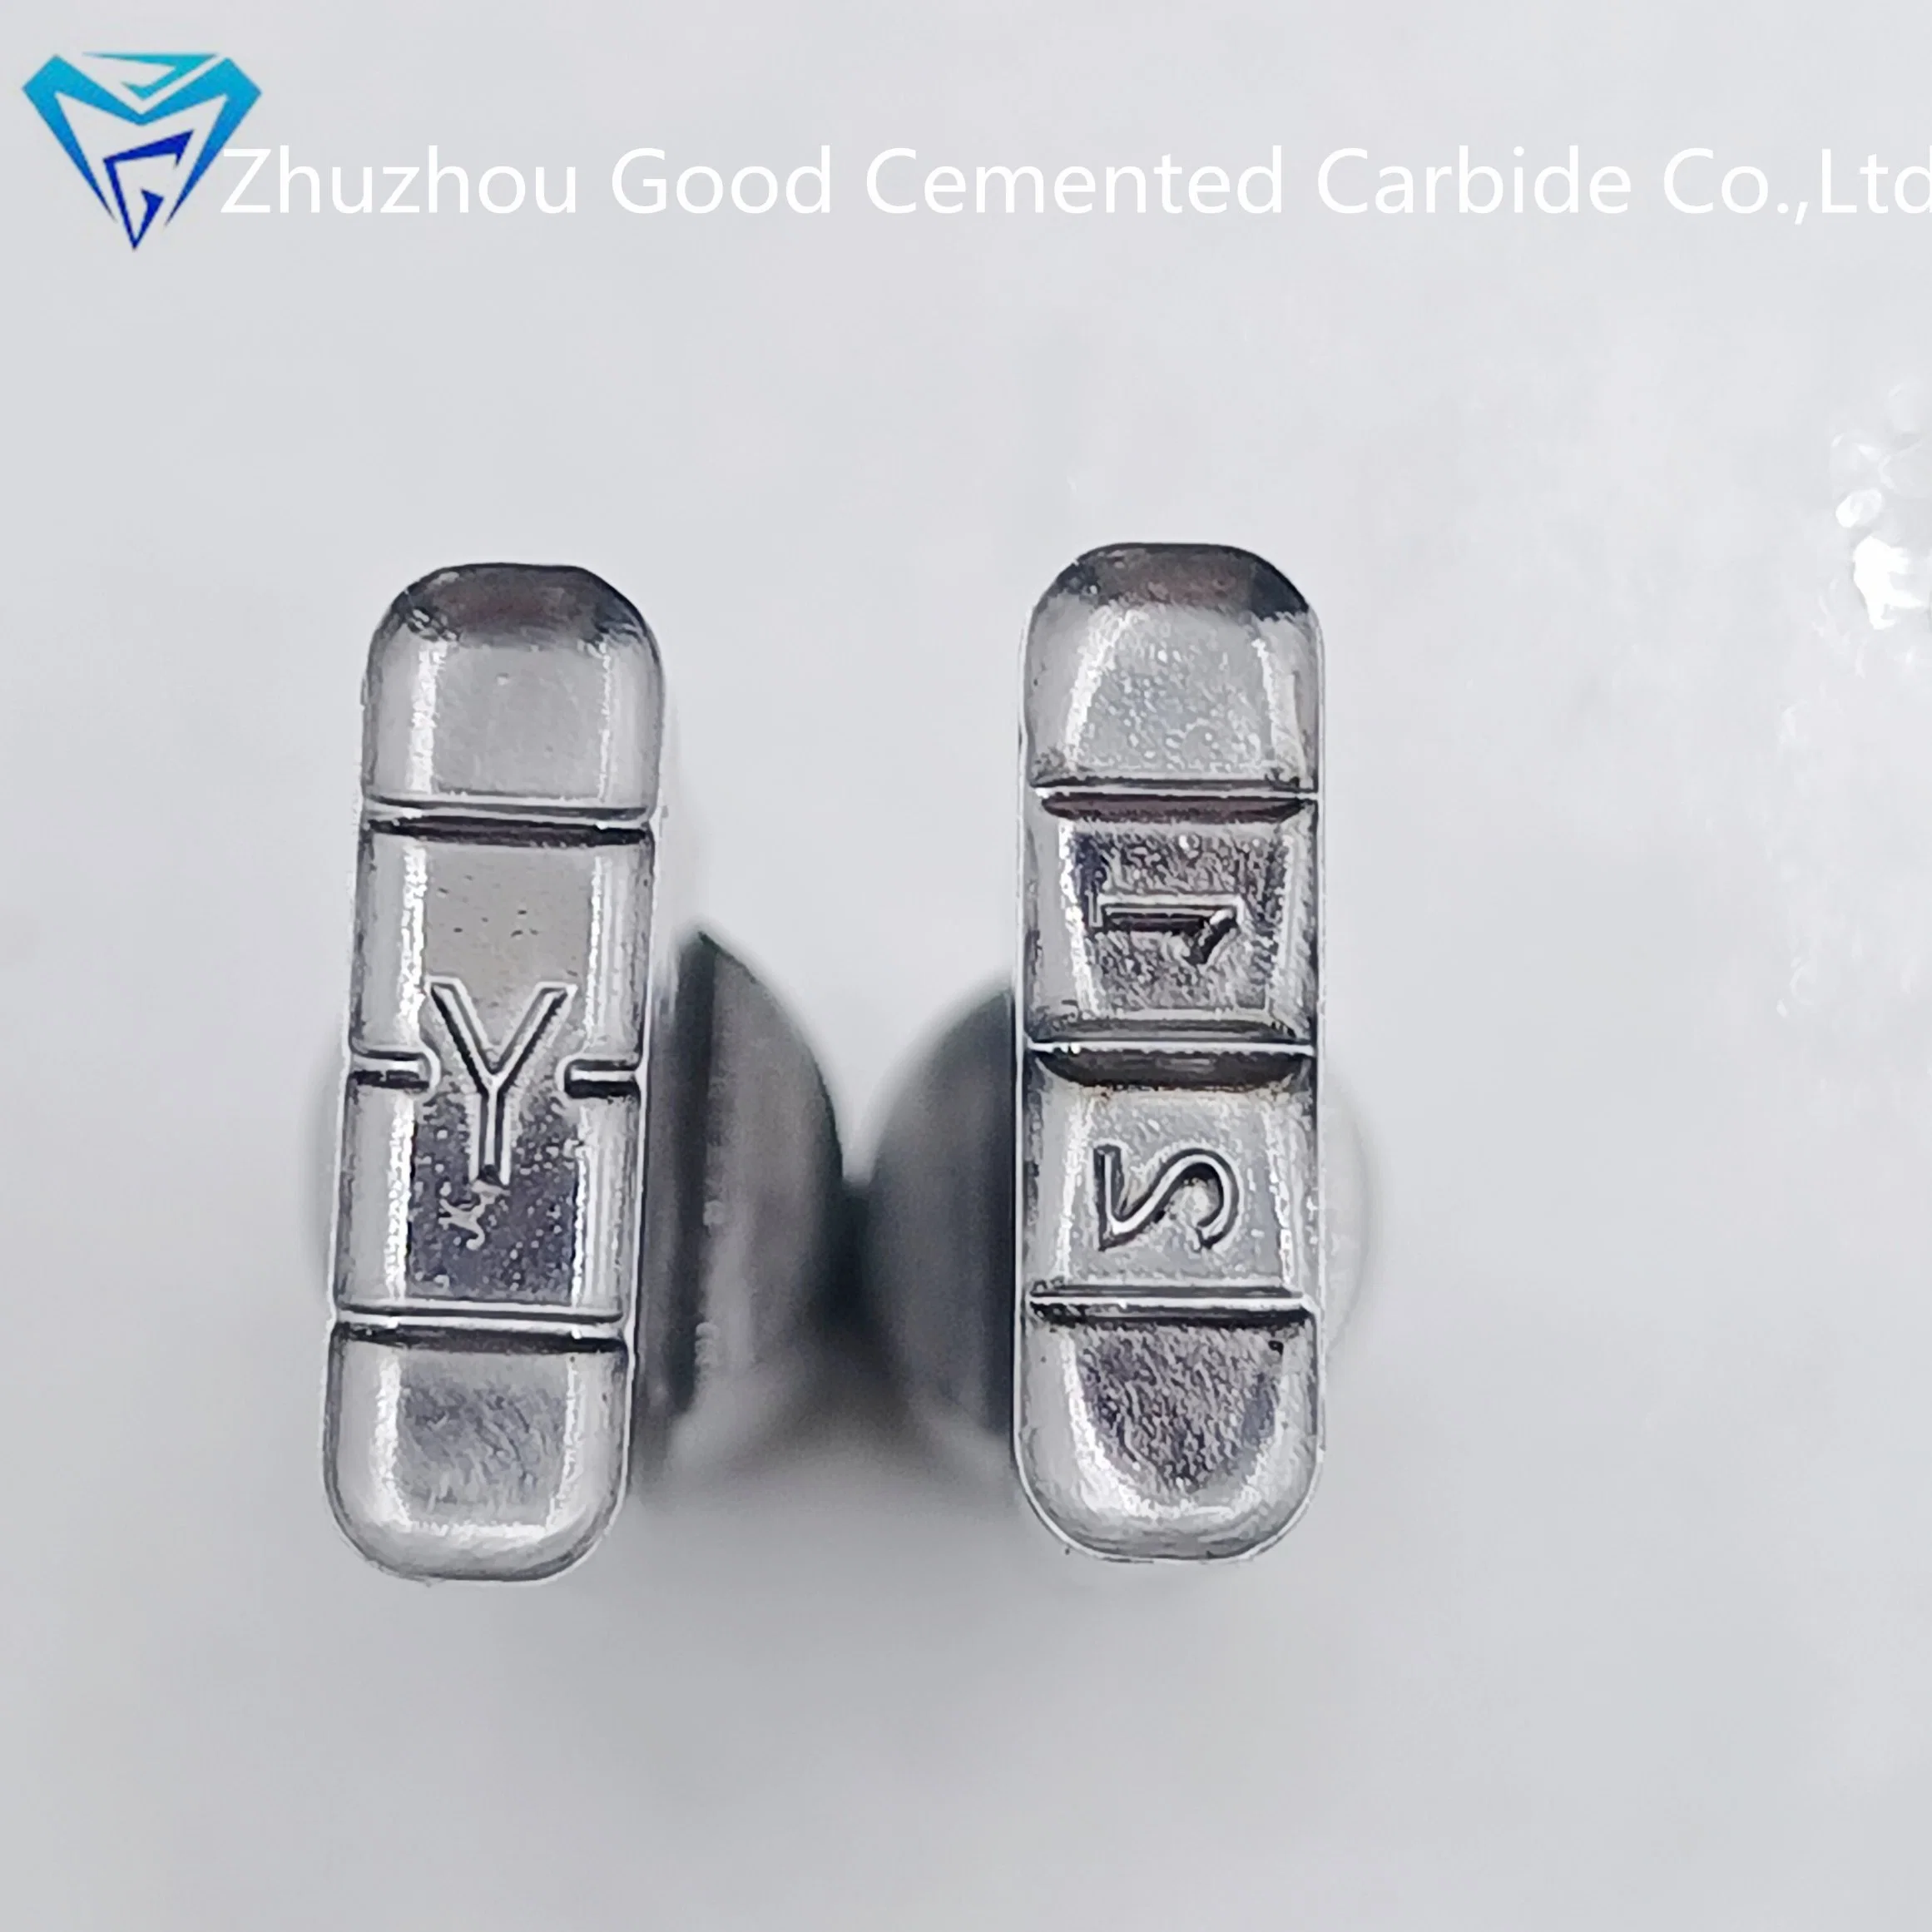 High Precious 3D Rectangle Shape Y21 Pattern Punch Pattern Tablet Dies Press Custom Die Mold Set for Tdp0/ Tdp 1.5 or Tdp5 Molds Machine Moulds Stamp Dies